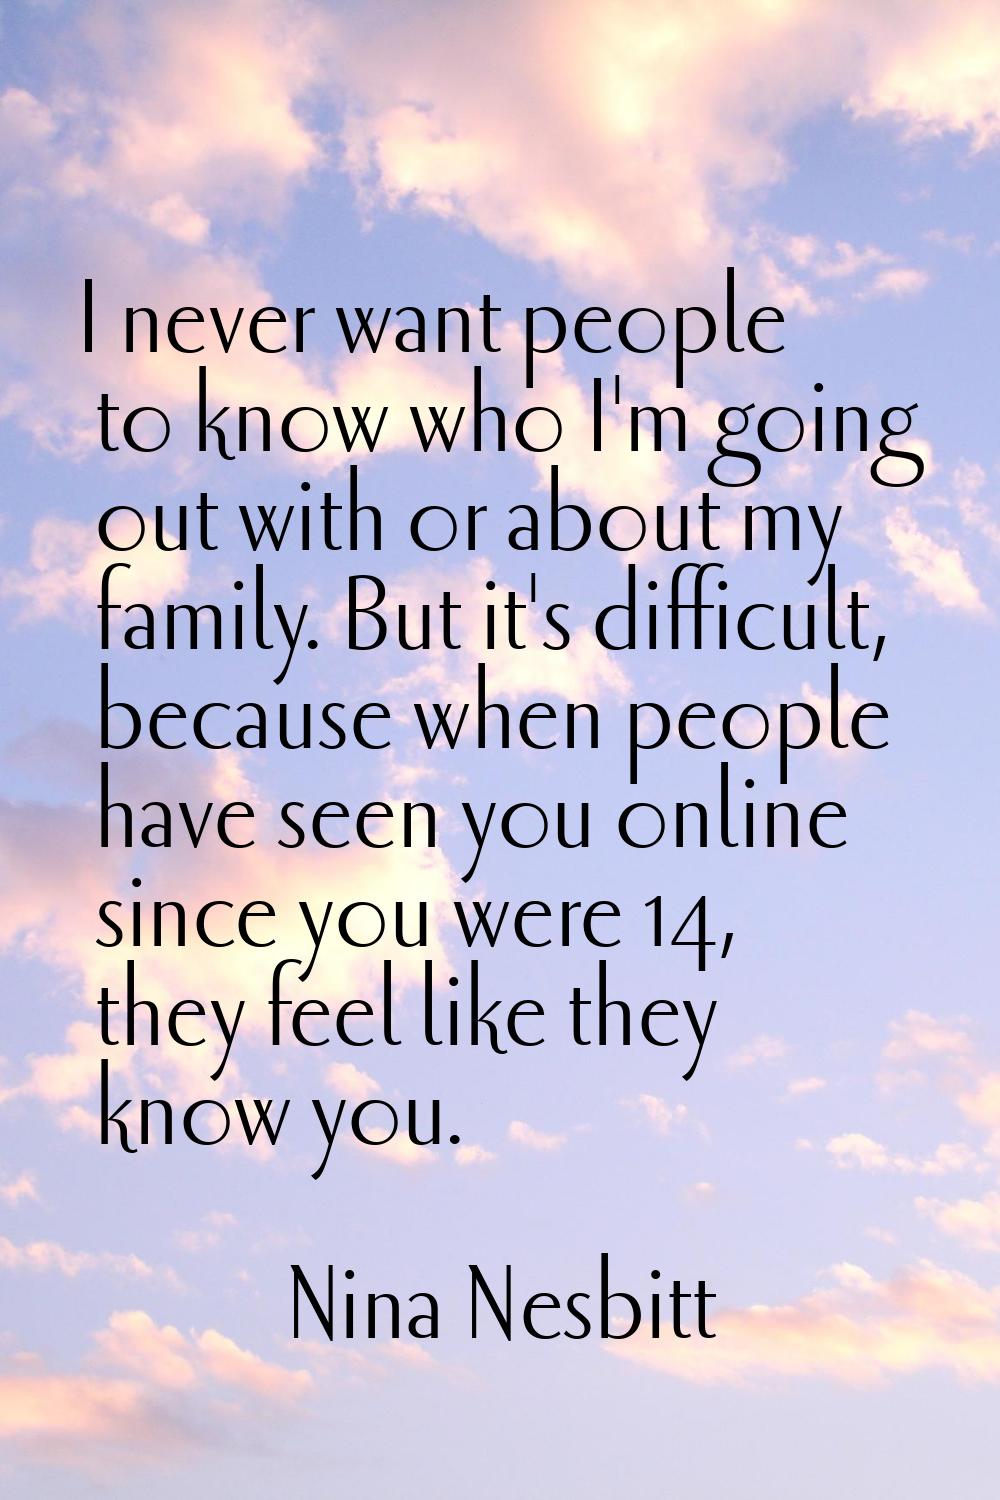 I never want people to know who I'm going out with or about my family. But it's difficult, because 